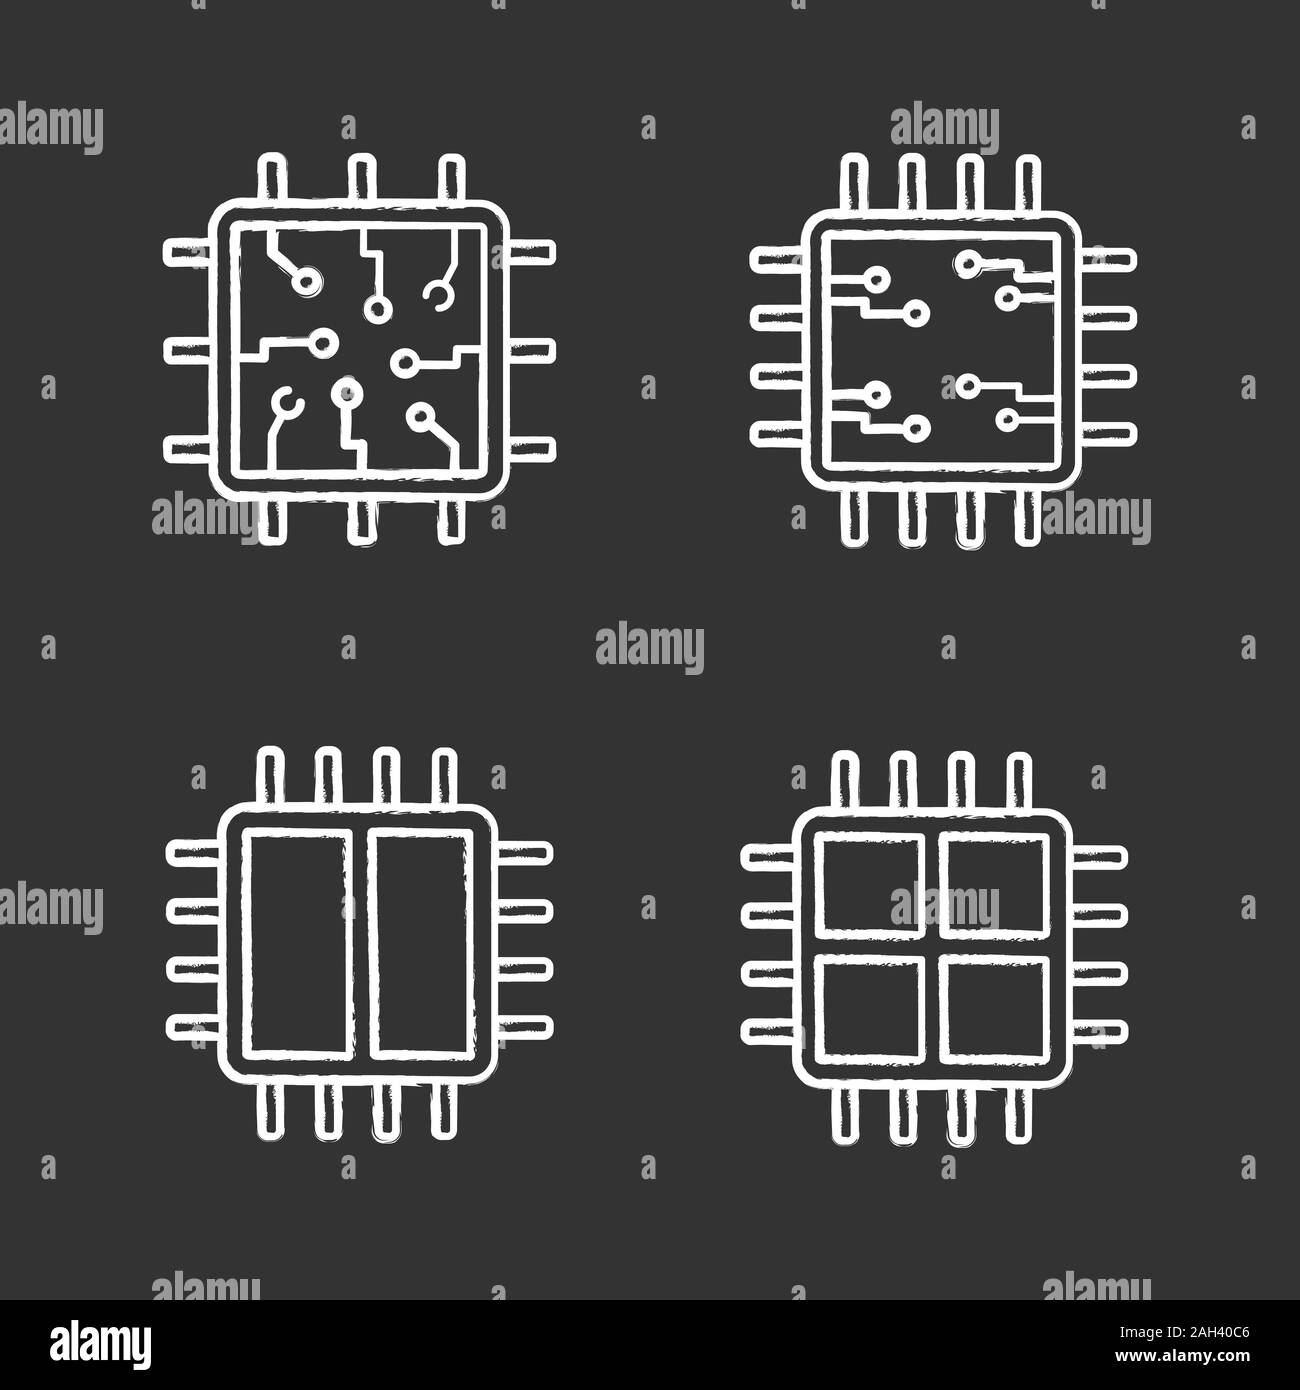 Processors chalk icons set. Chip, microprocessor, integrated unit, dual and quad core processors. Isolated vector chalkboard illustrations Stock Vector